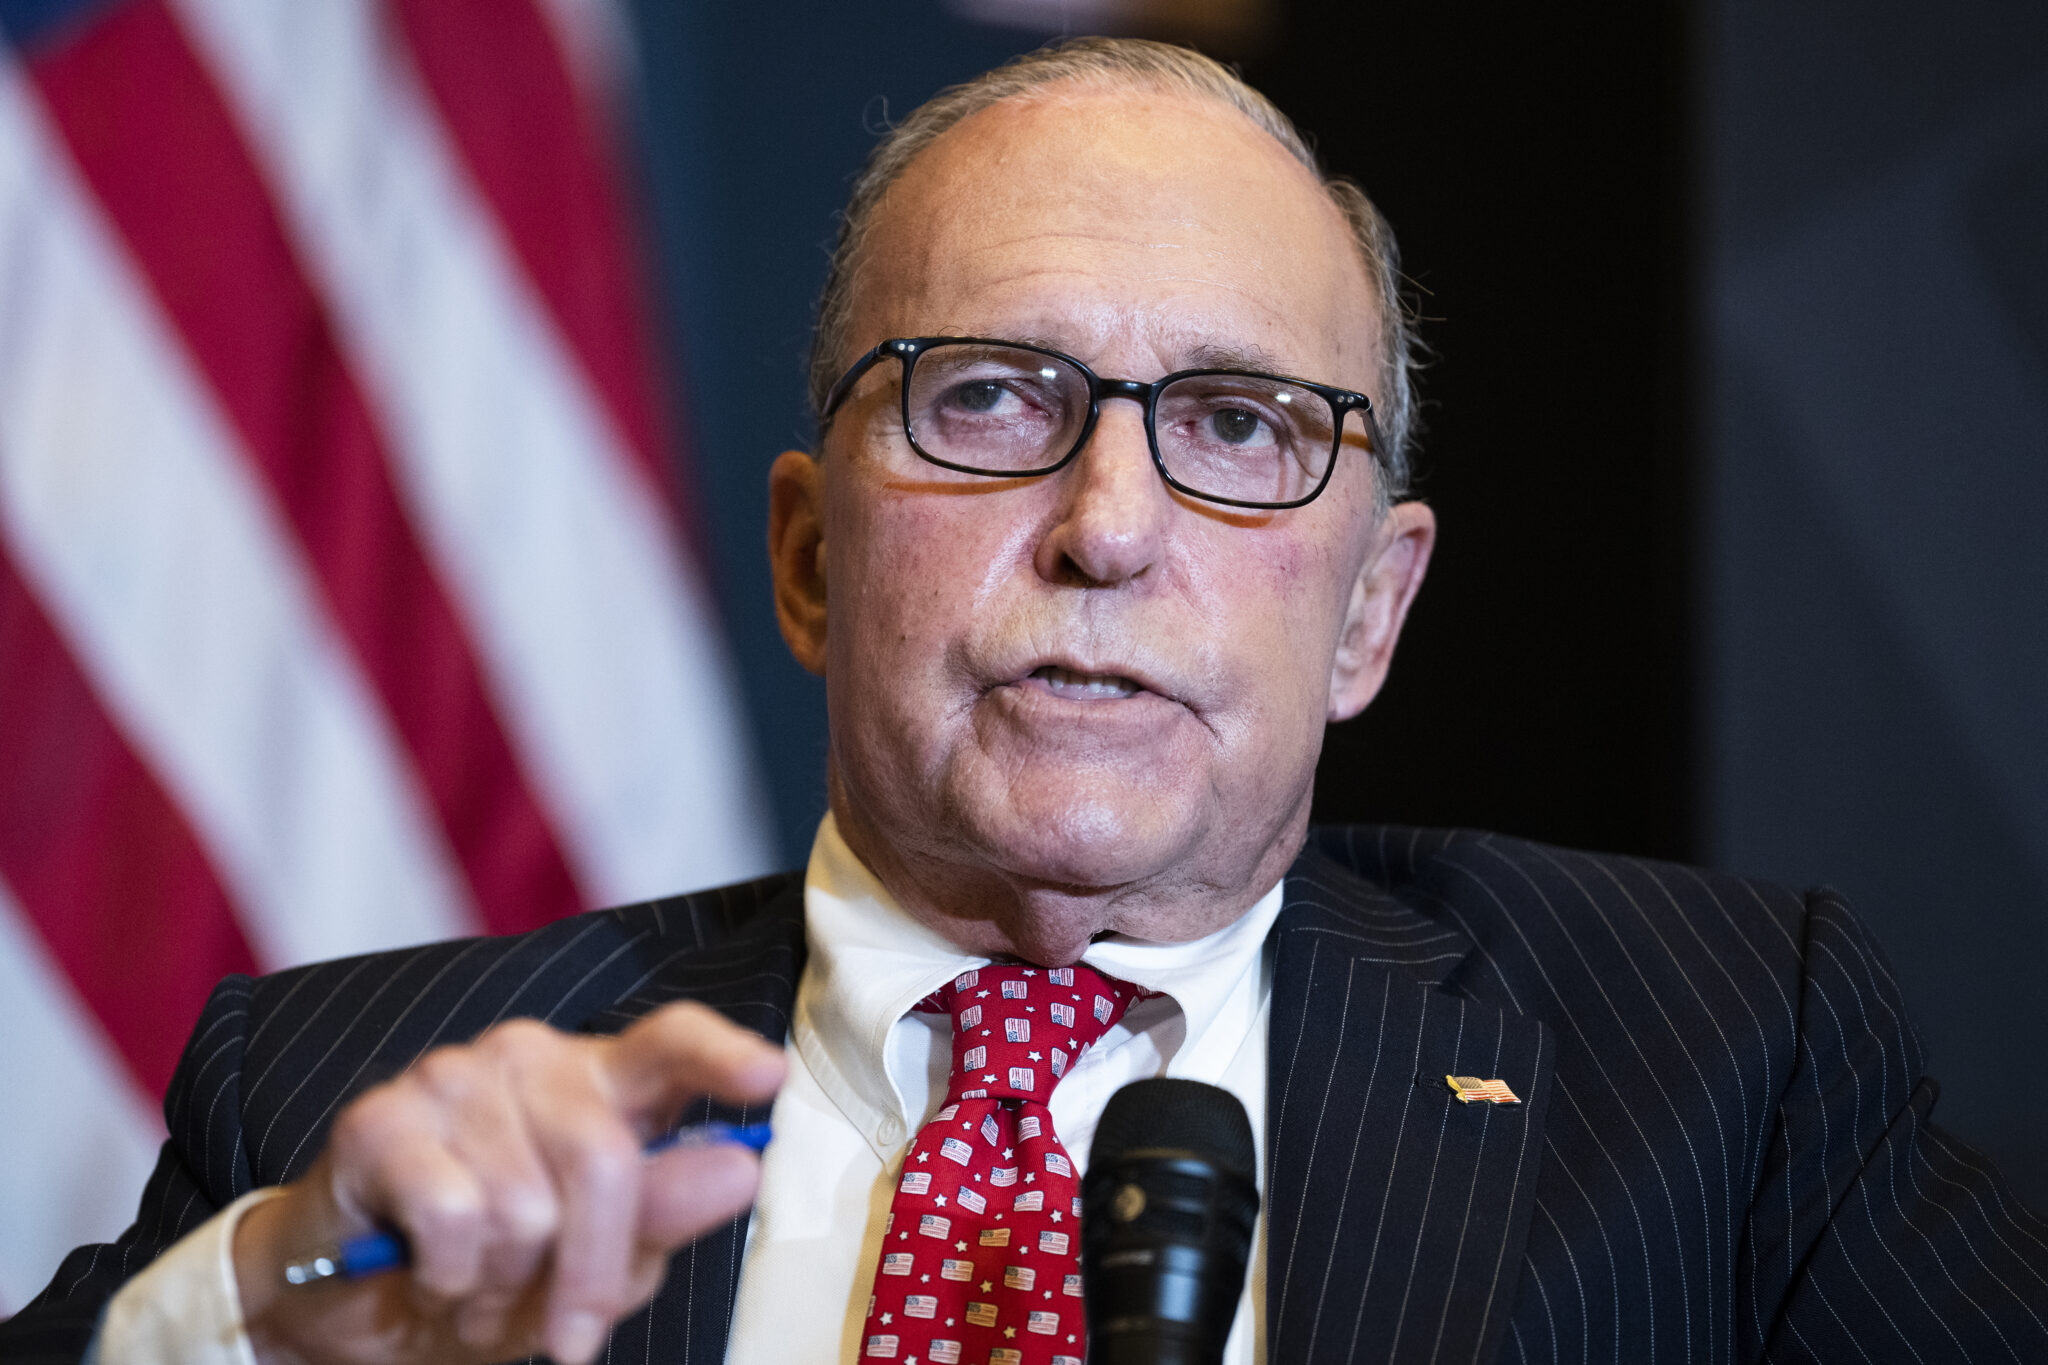 UNITED STATES - JULY 26: Larry Kudlow, former director of the U.S. National Economic Council, participates in a discussion titled Make the Greatest Economy in the World Work for All Americans, during the America First Policy Institute's America First Agenda Summit at the Marriott Marquis on Tuesday, July 26, 2022. (Tom Williams/CQ-Roll Call, Inc via Getty Images)